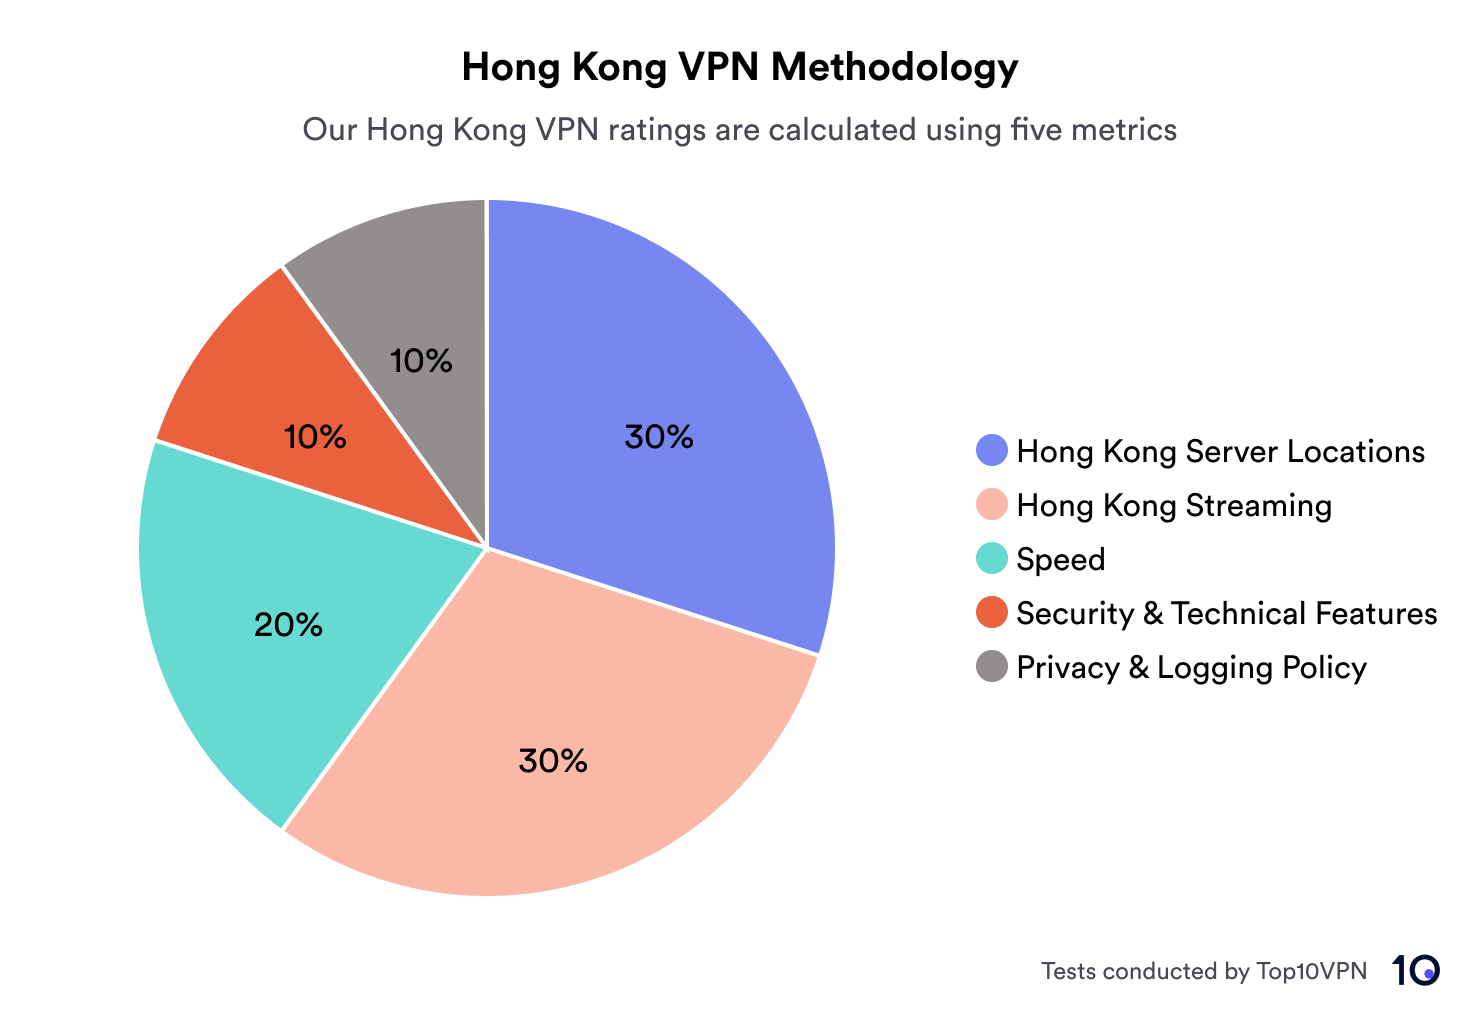 Pie chart showing the breakdown of our Hong Kong methodology, which is calculated using 5 metrics. Hong Kong server locations 30%, Hong Kong streaming 30%, speed 20%, security and technical features 10% and privacy and logging policy 10%